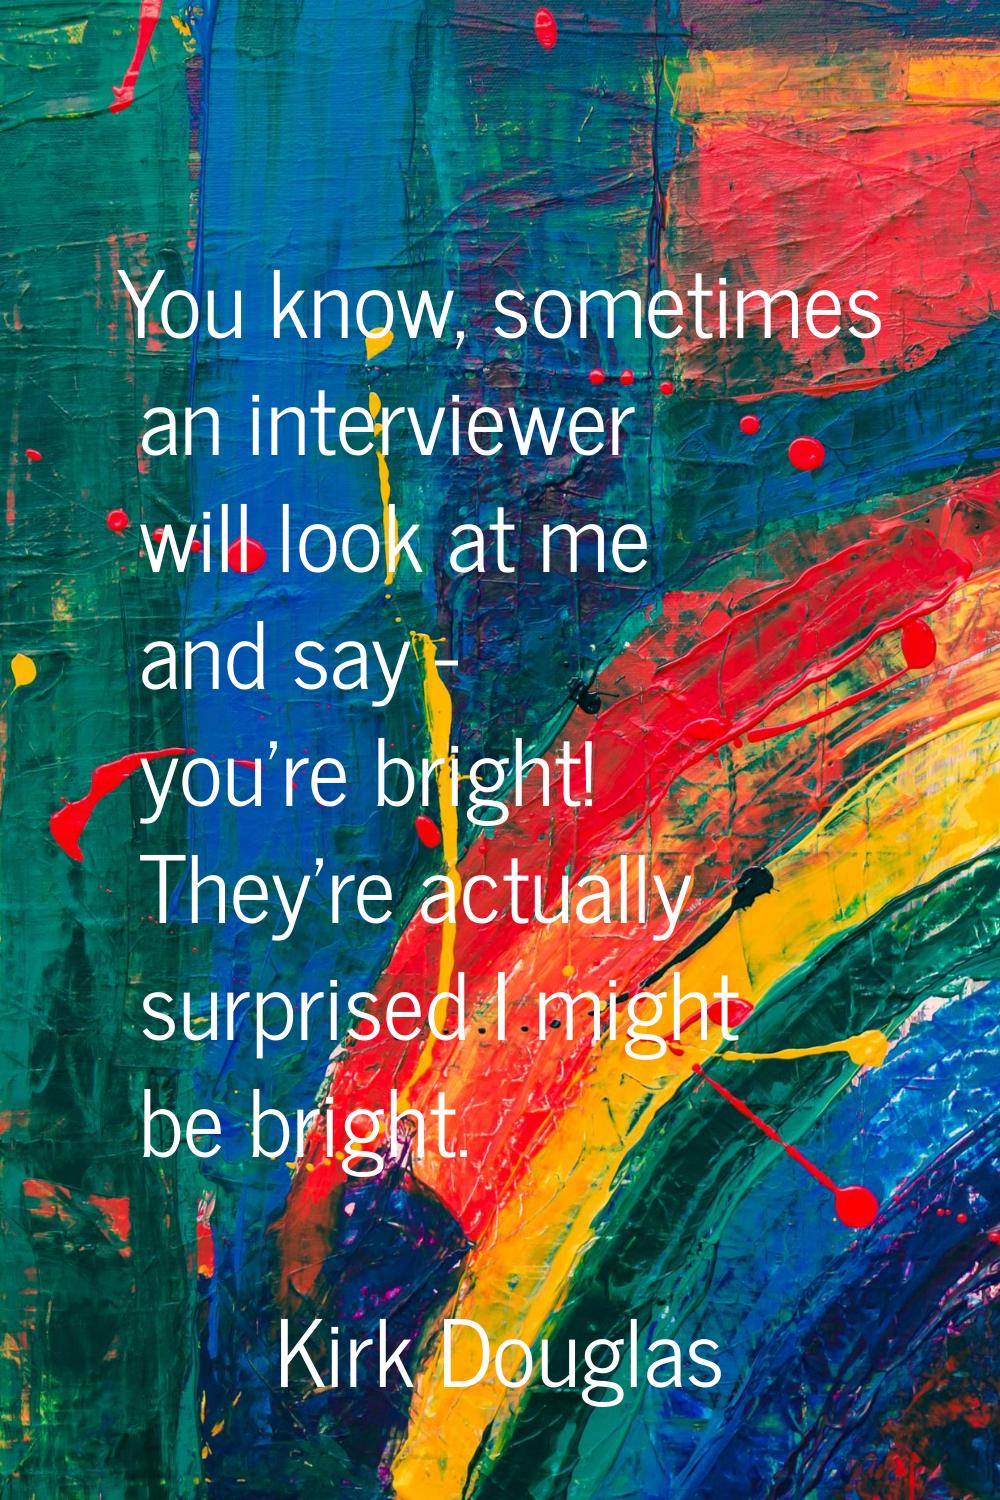 You know, sometimes an interviewer will look at me and say - you're bright! They're actually surpri